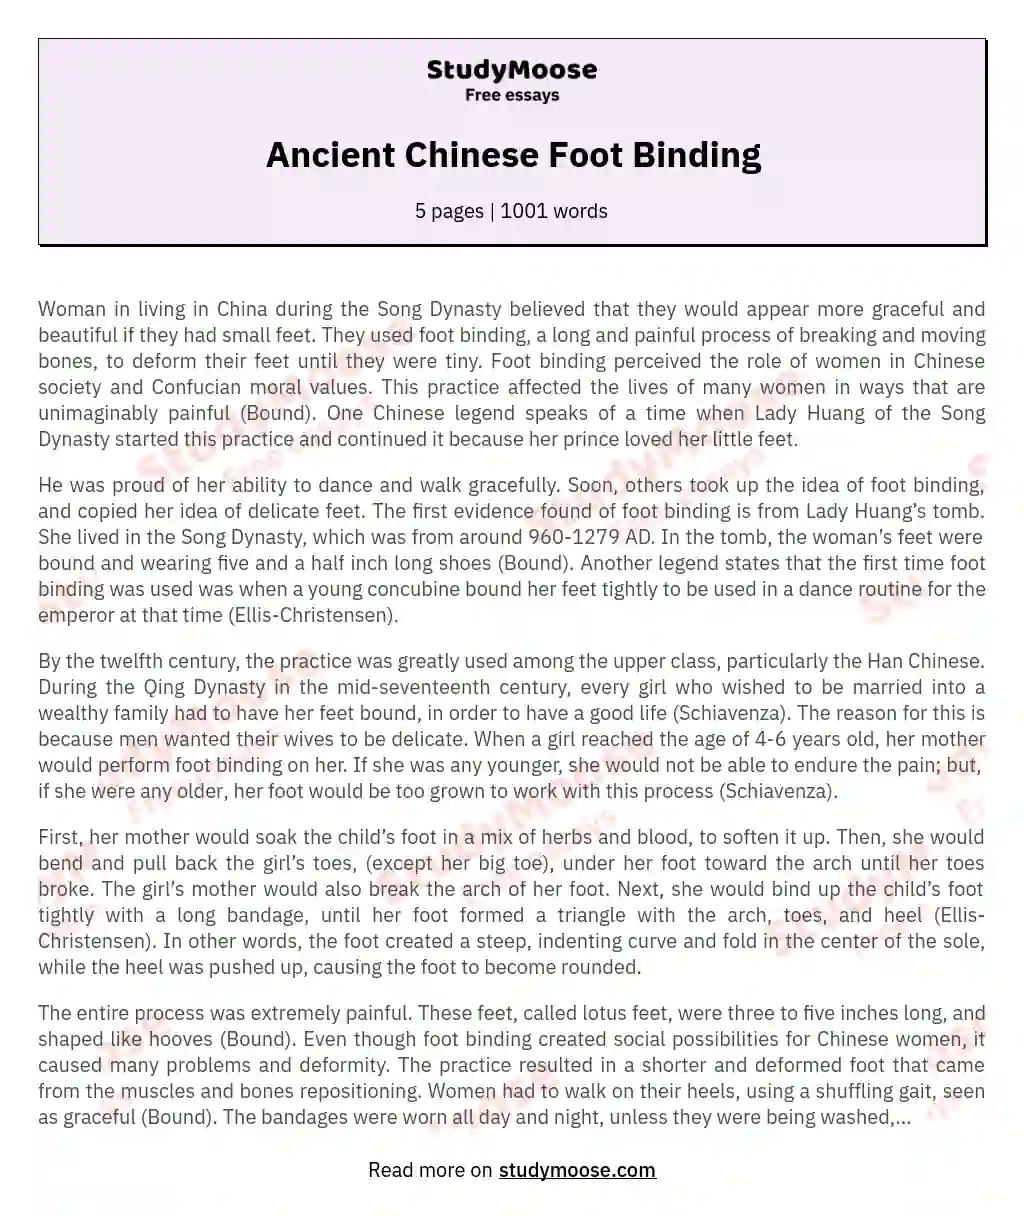 Ancient Chinese Foot Binding essay